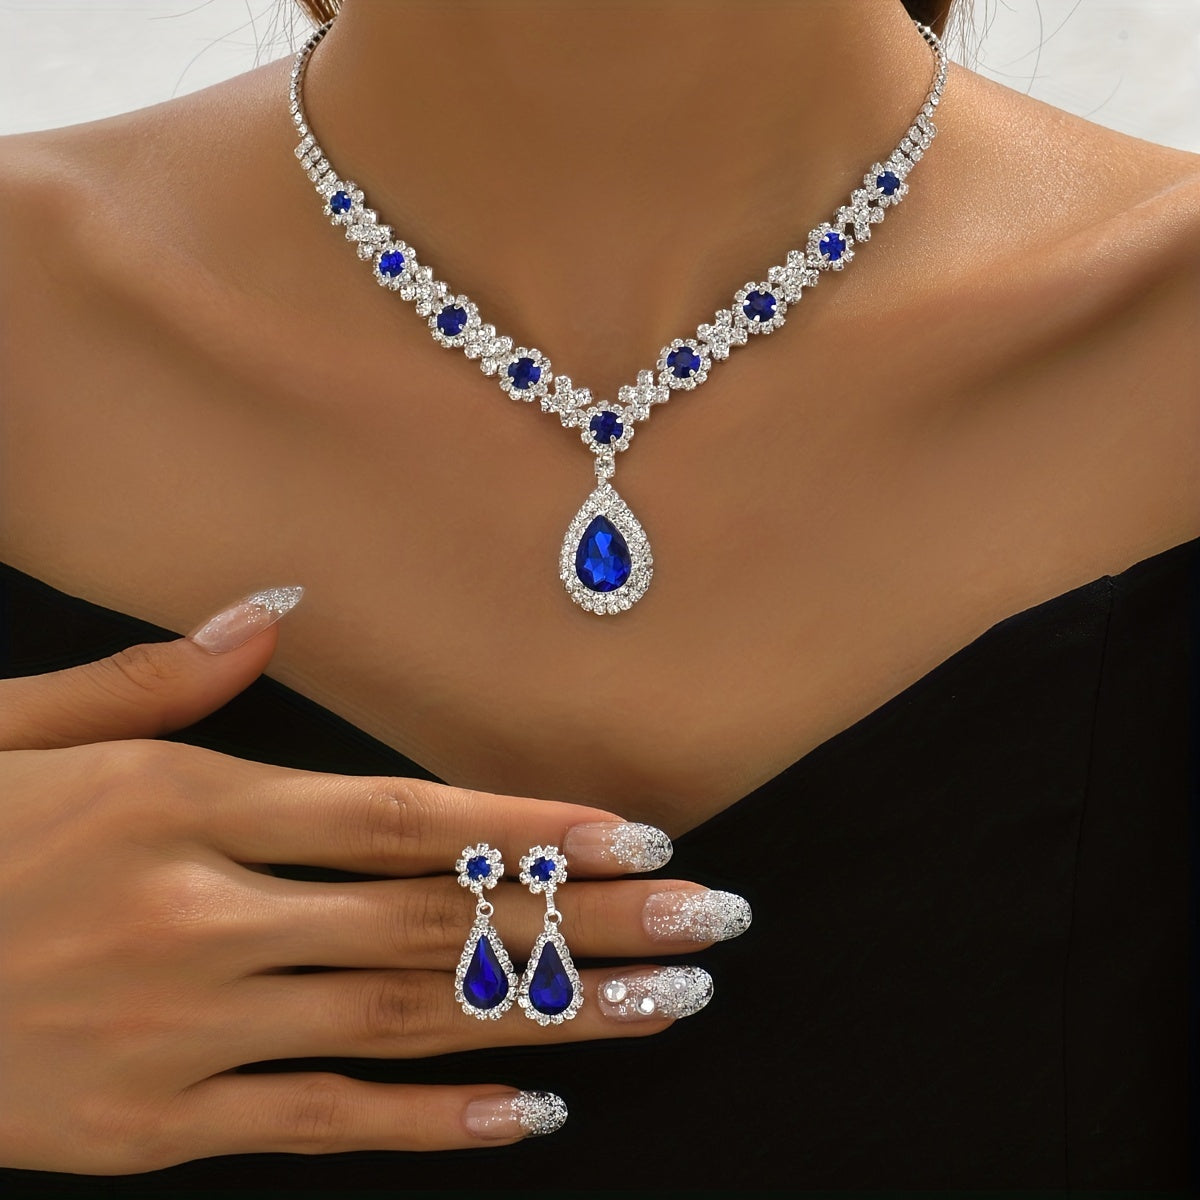 Stunning Wedding Jewelry Set with Sparkling Synthetic Gems - Pendant Necklace and Dangle Earrings